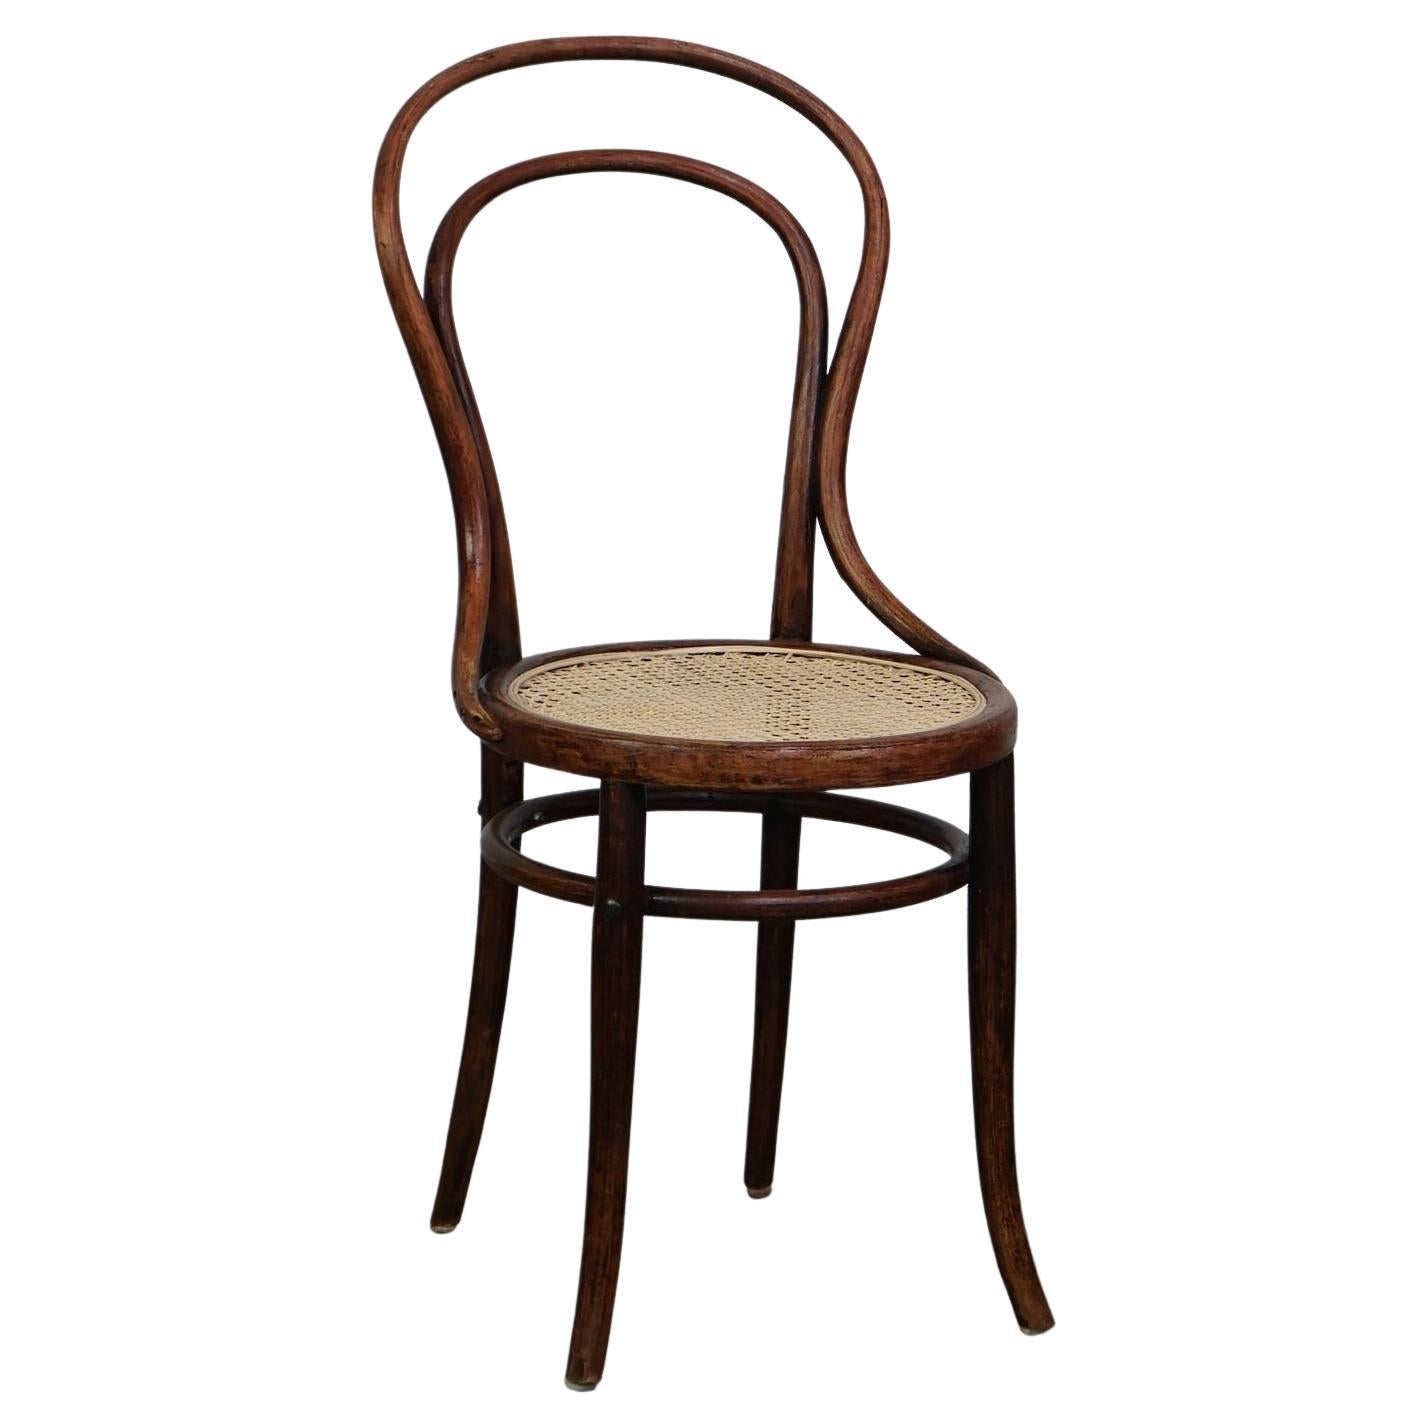 Original antique bentwood Thonet bistro chair model no. 14 with a new matte seat For Sale